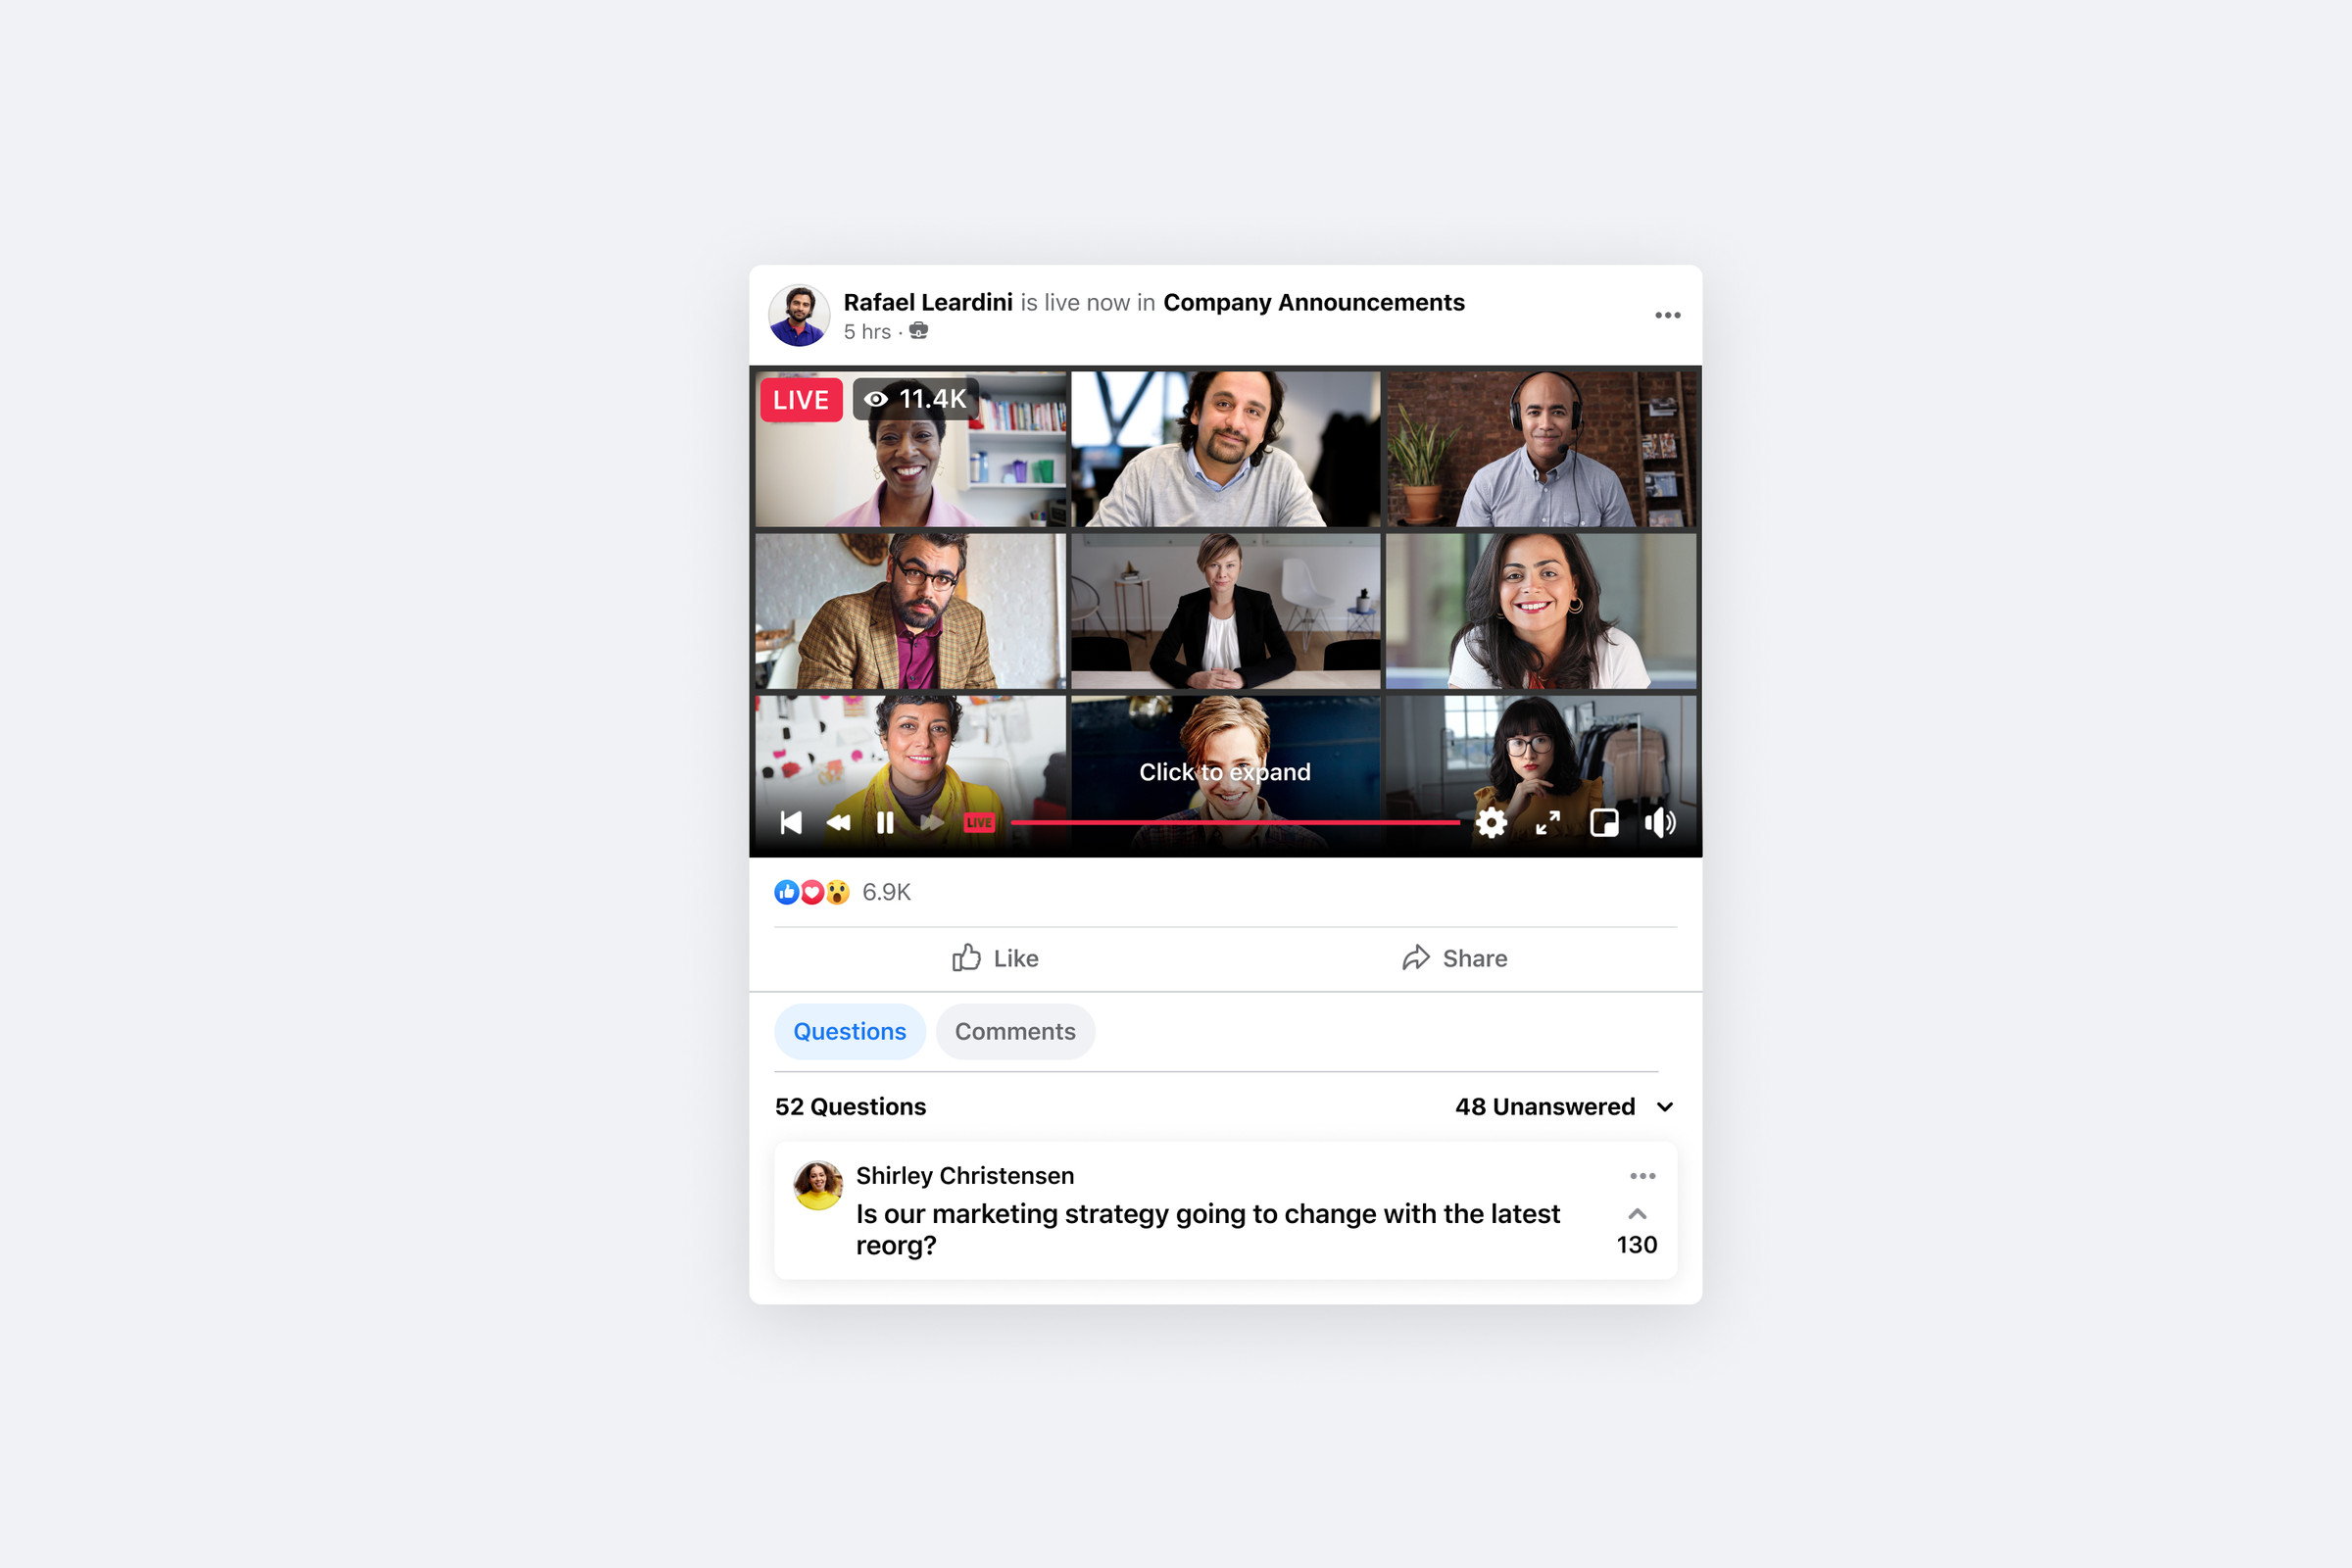 Microsoft Teams will soon livestream into Workplace.